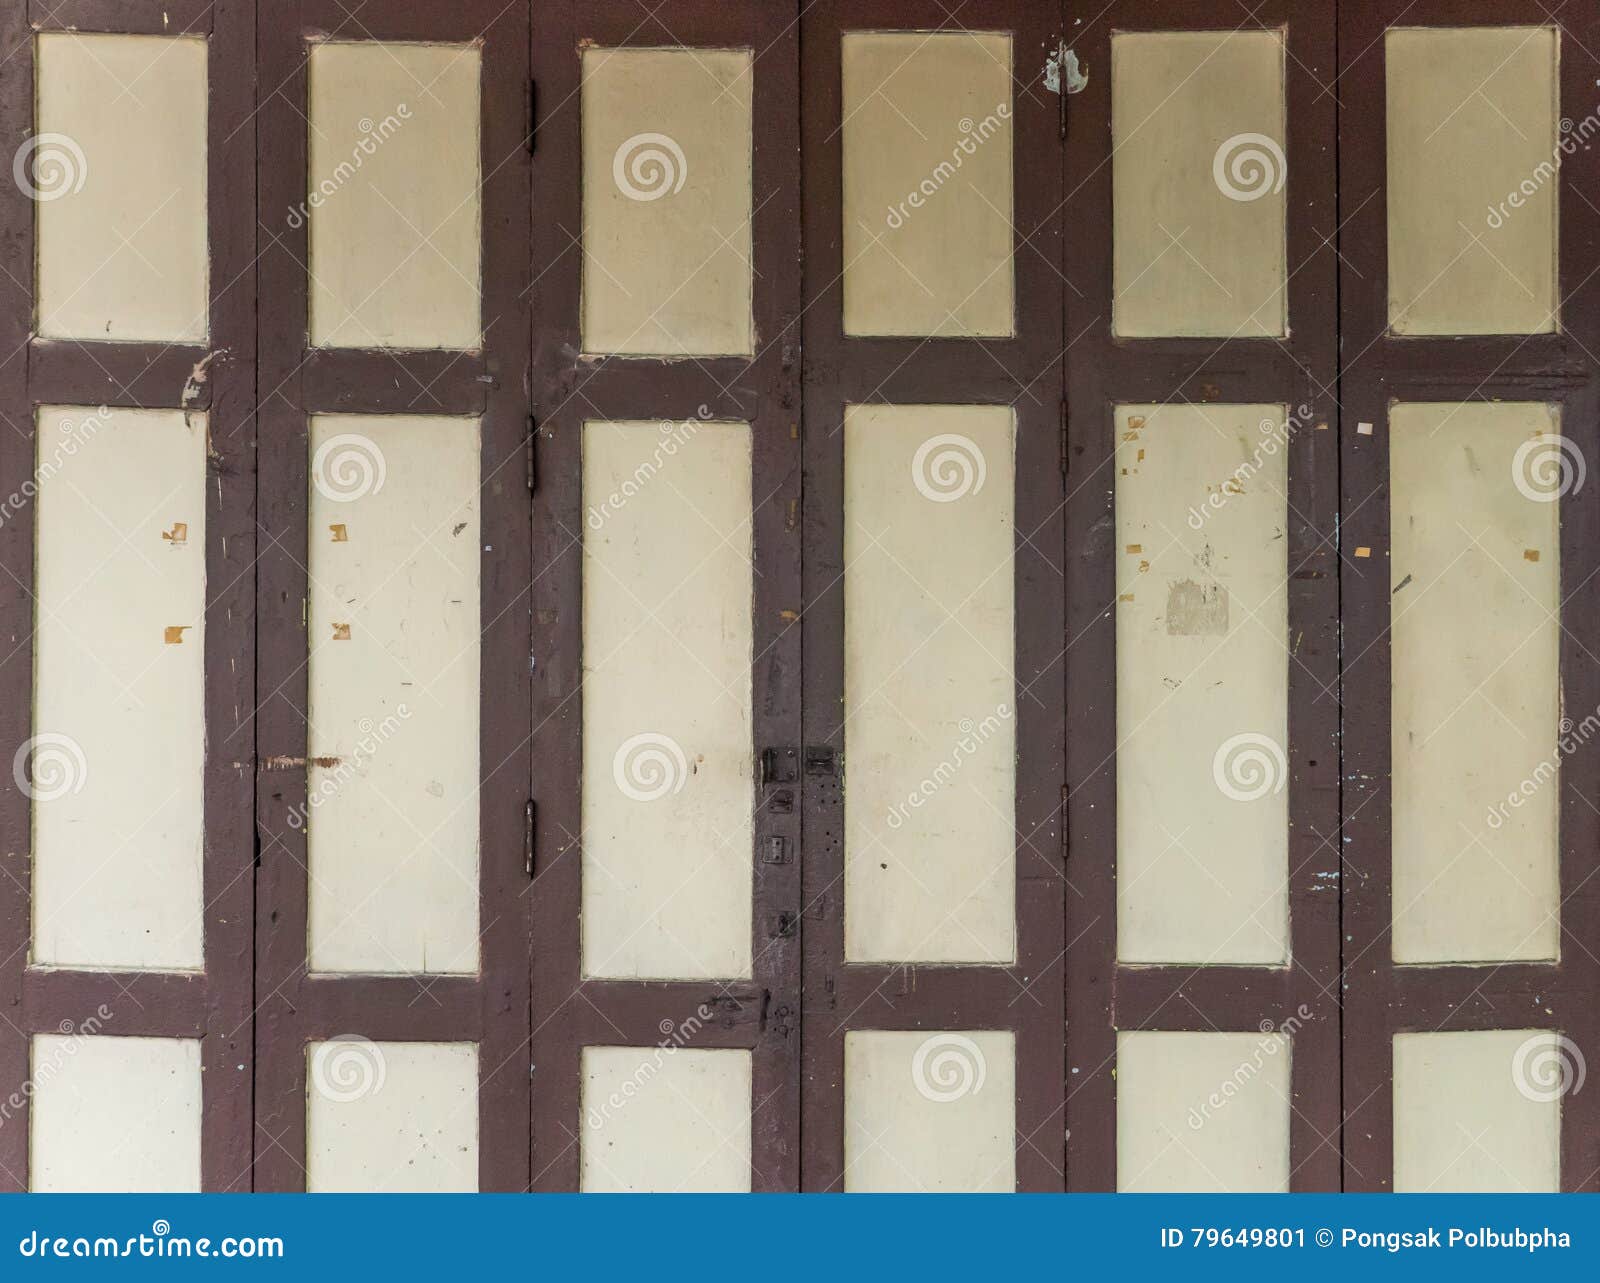 Wooden Folding Door Dirty Stain Old Building Rural Area 79649801 